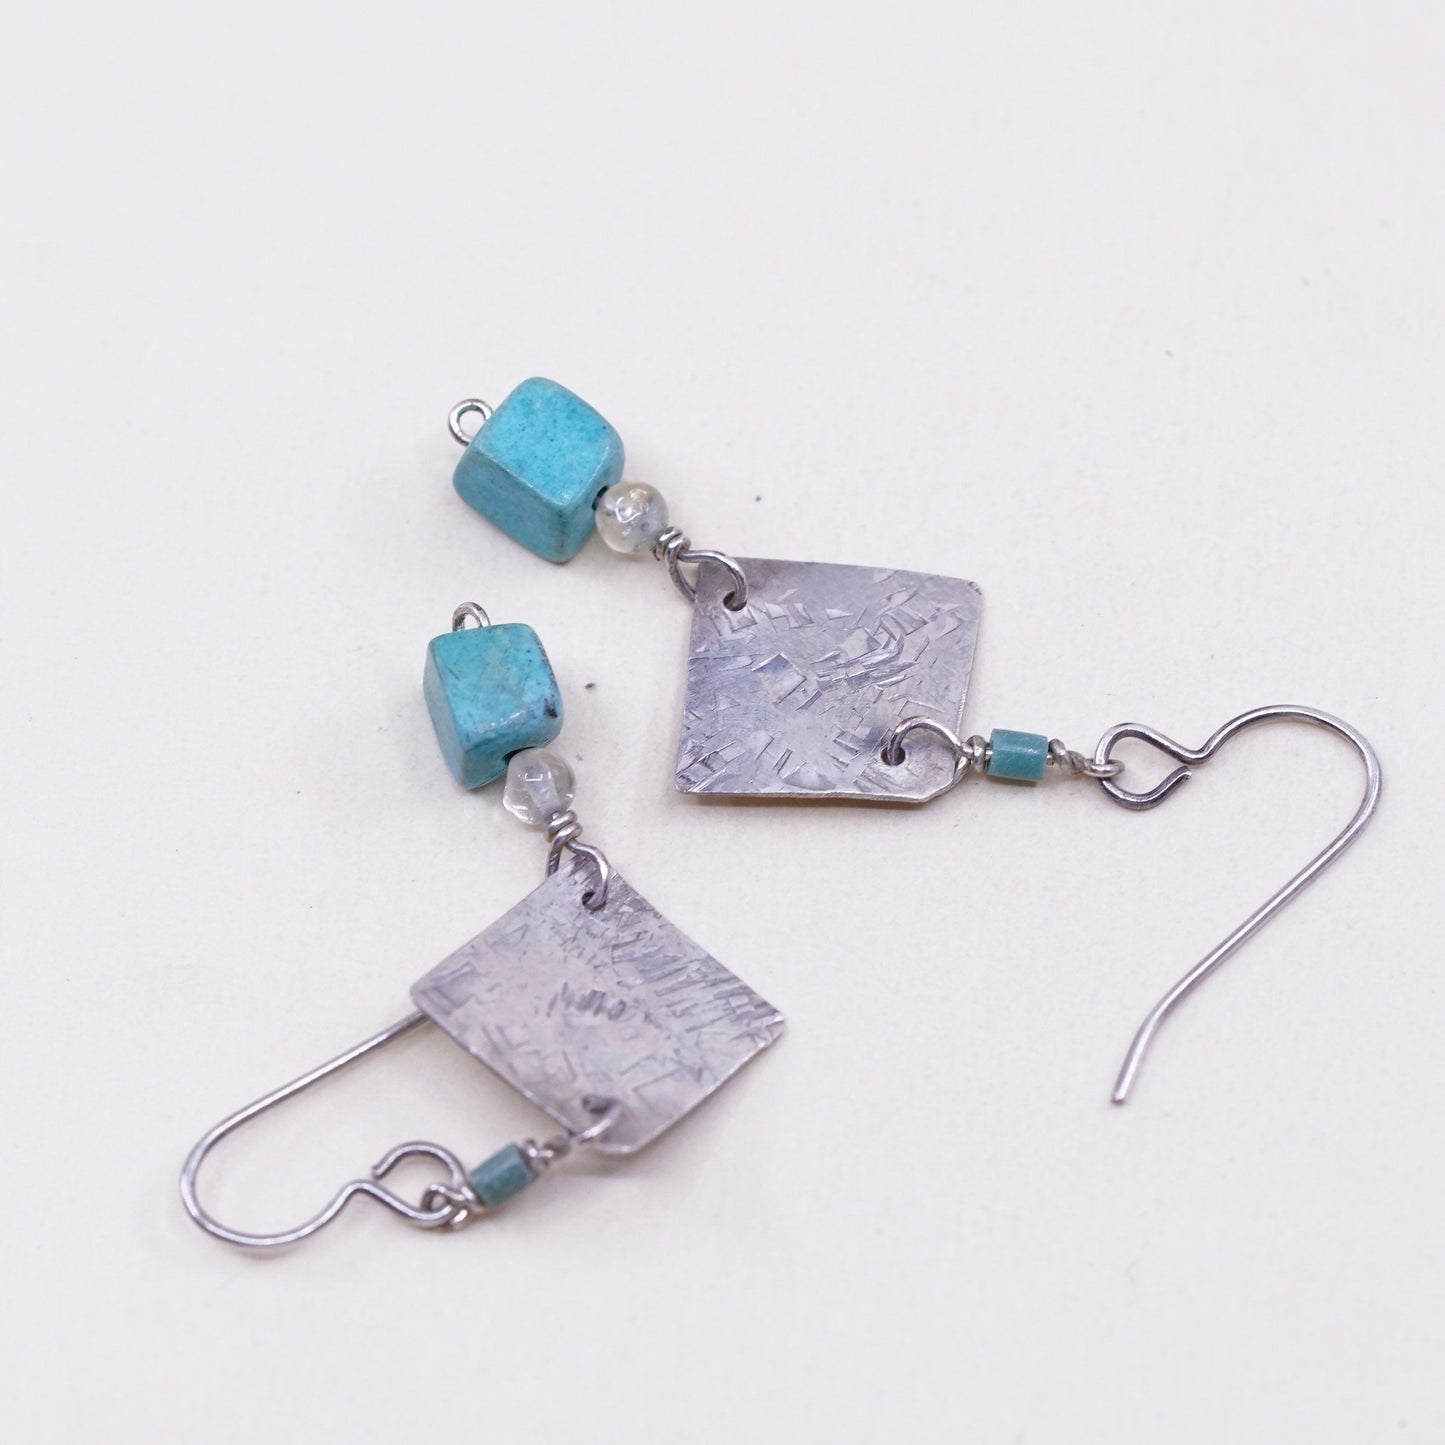 Vintage Sterling 925 silver handmade tag earrings, with cube turquoise